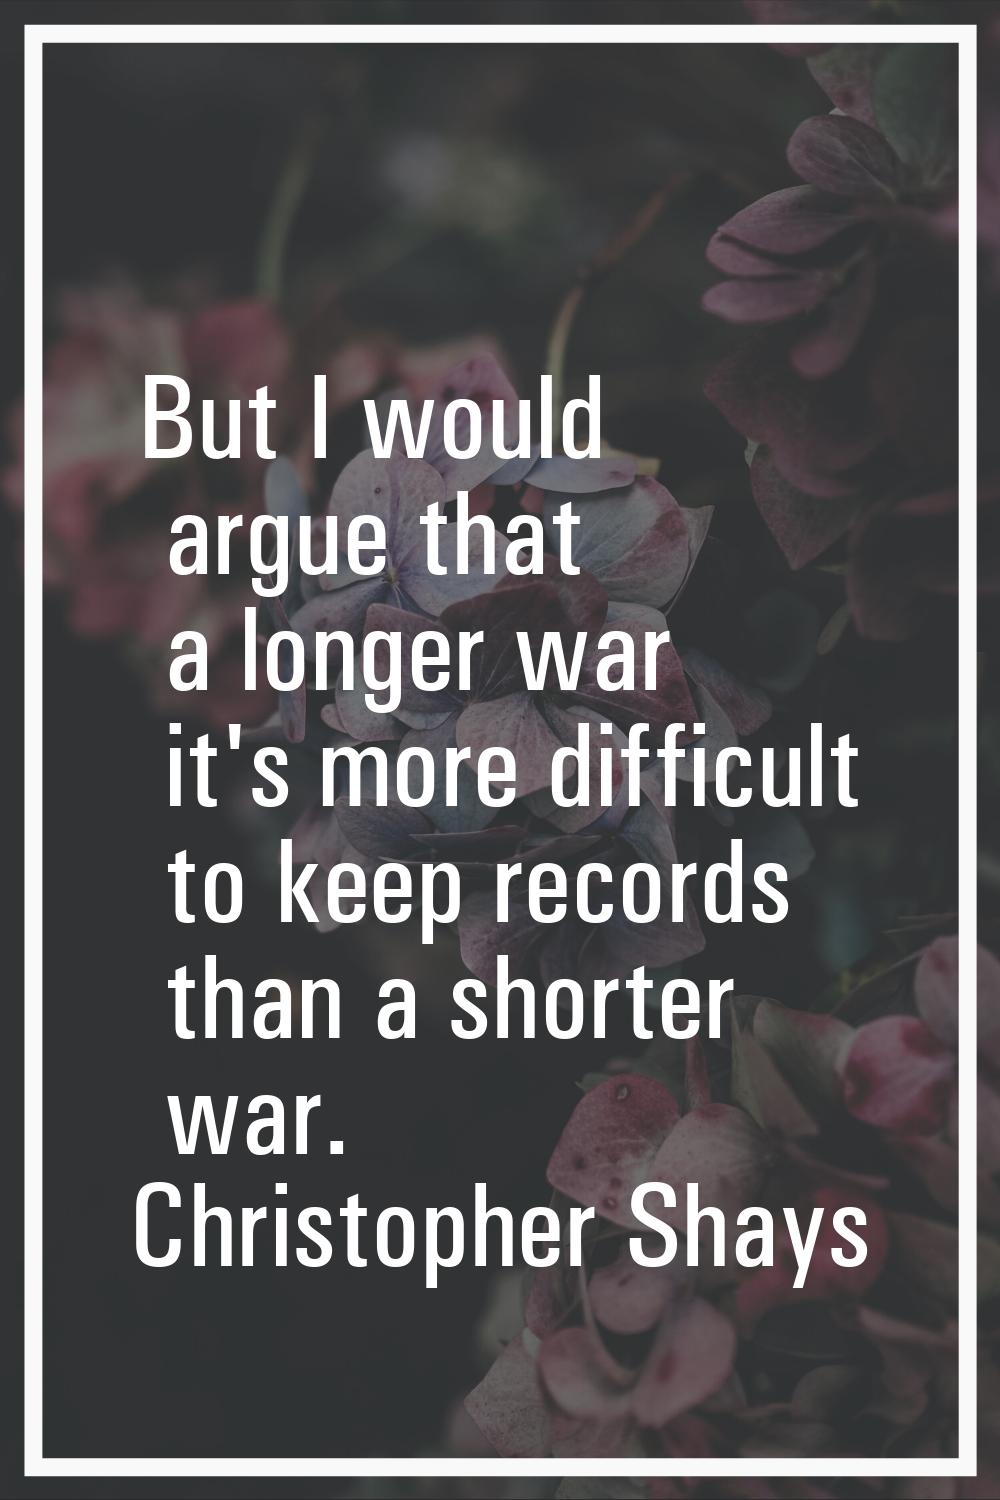 But I would argue that a longer war it's more difficult to keep records than a shorter war.